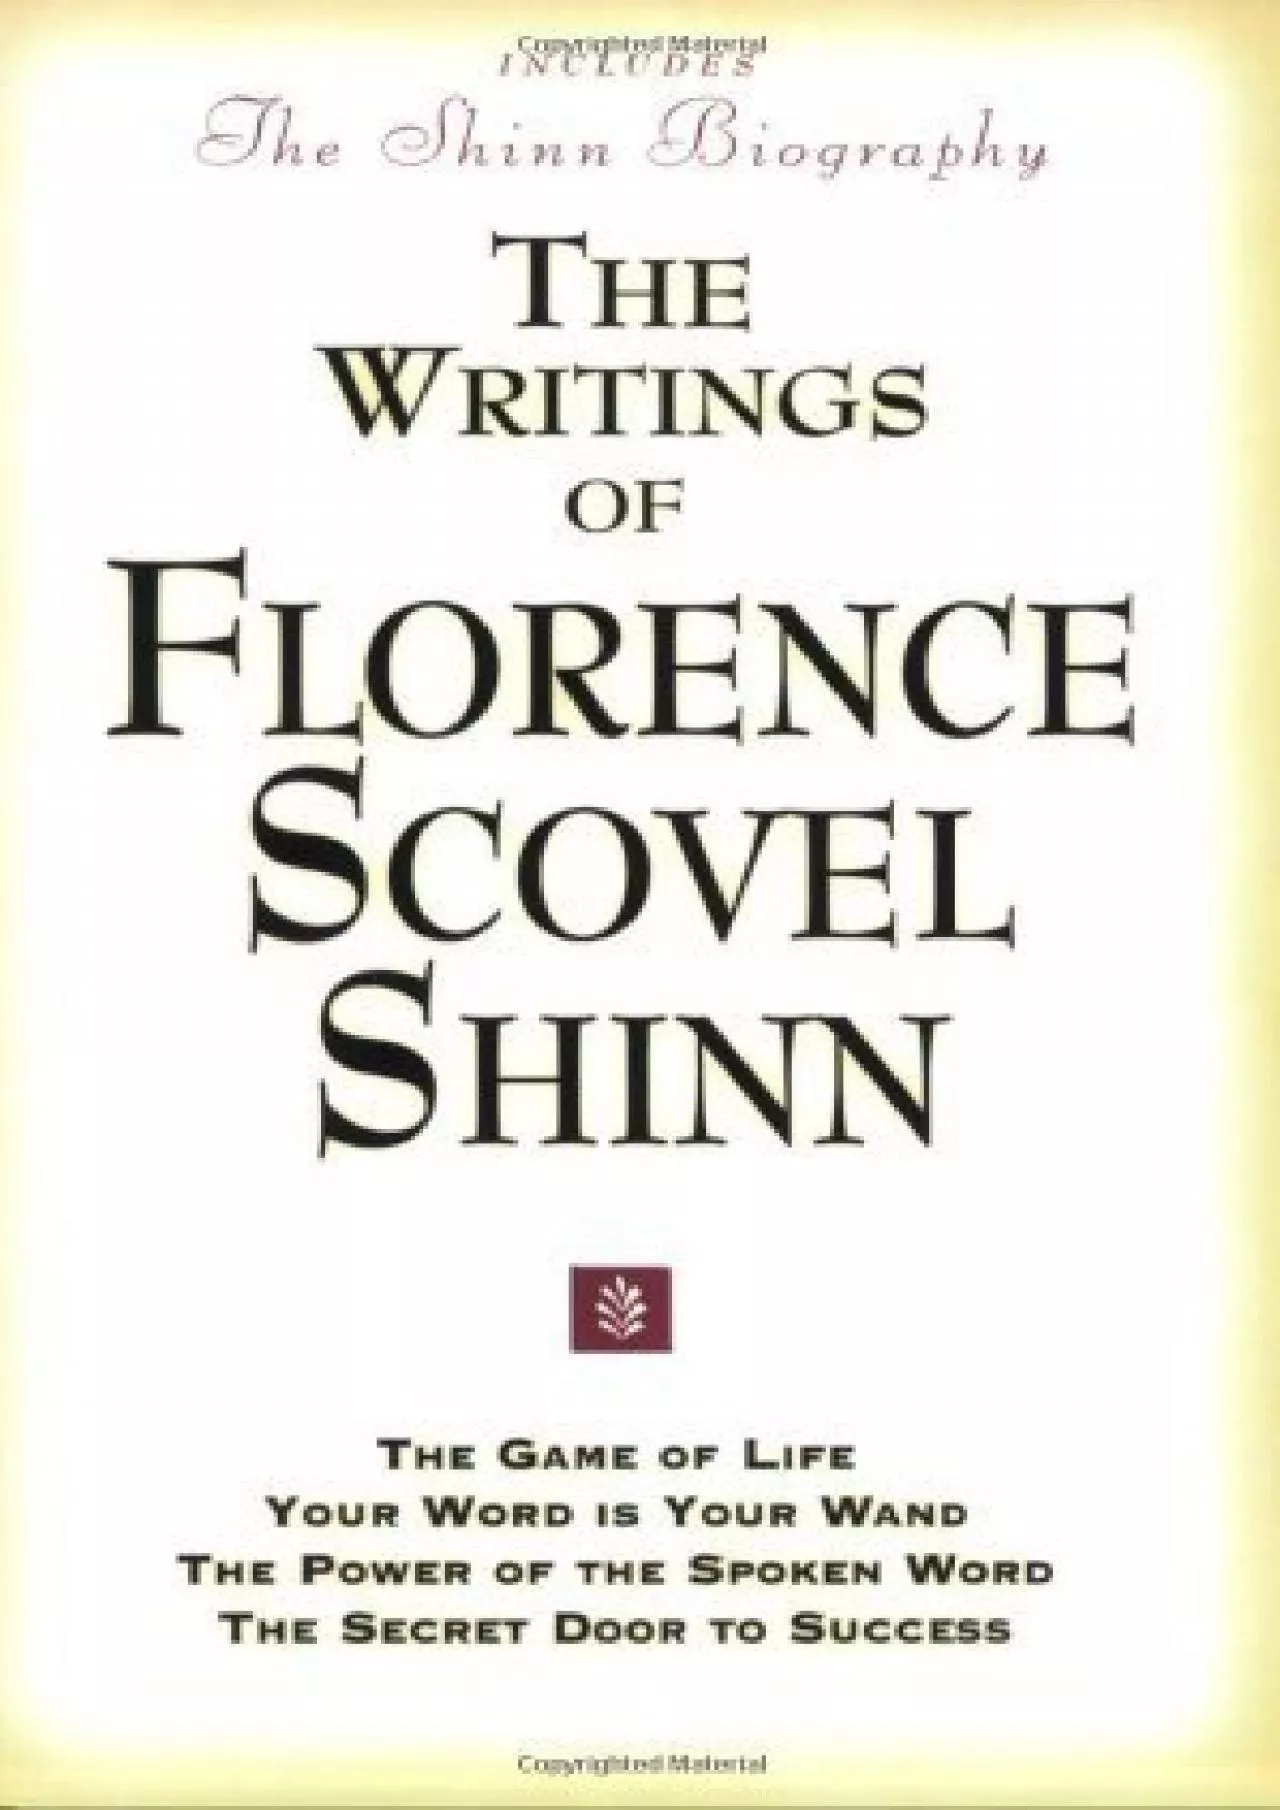 (READ)-The Writings of Florence Scovel Shinn (Includes The Shinn Biography) The Game of